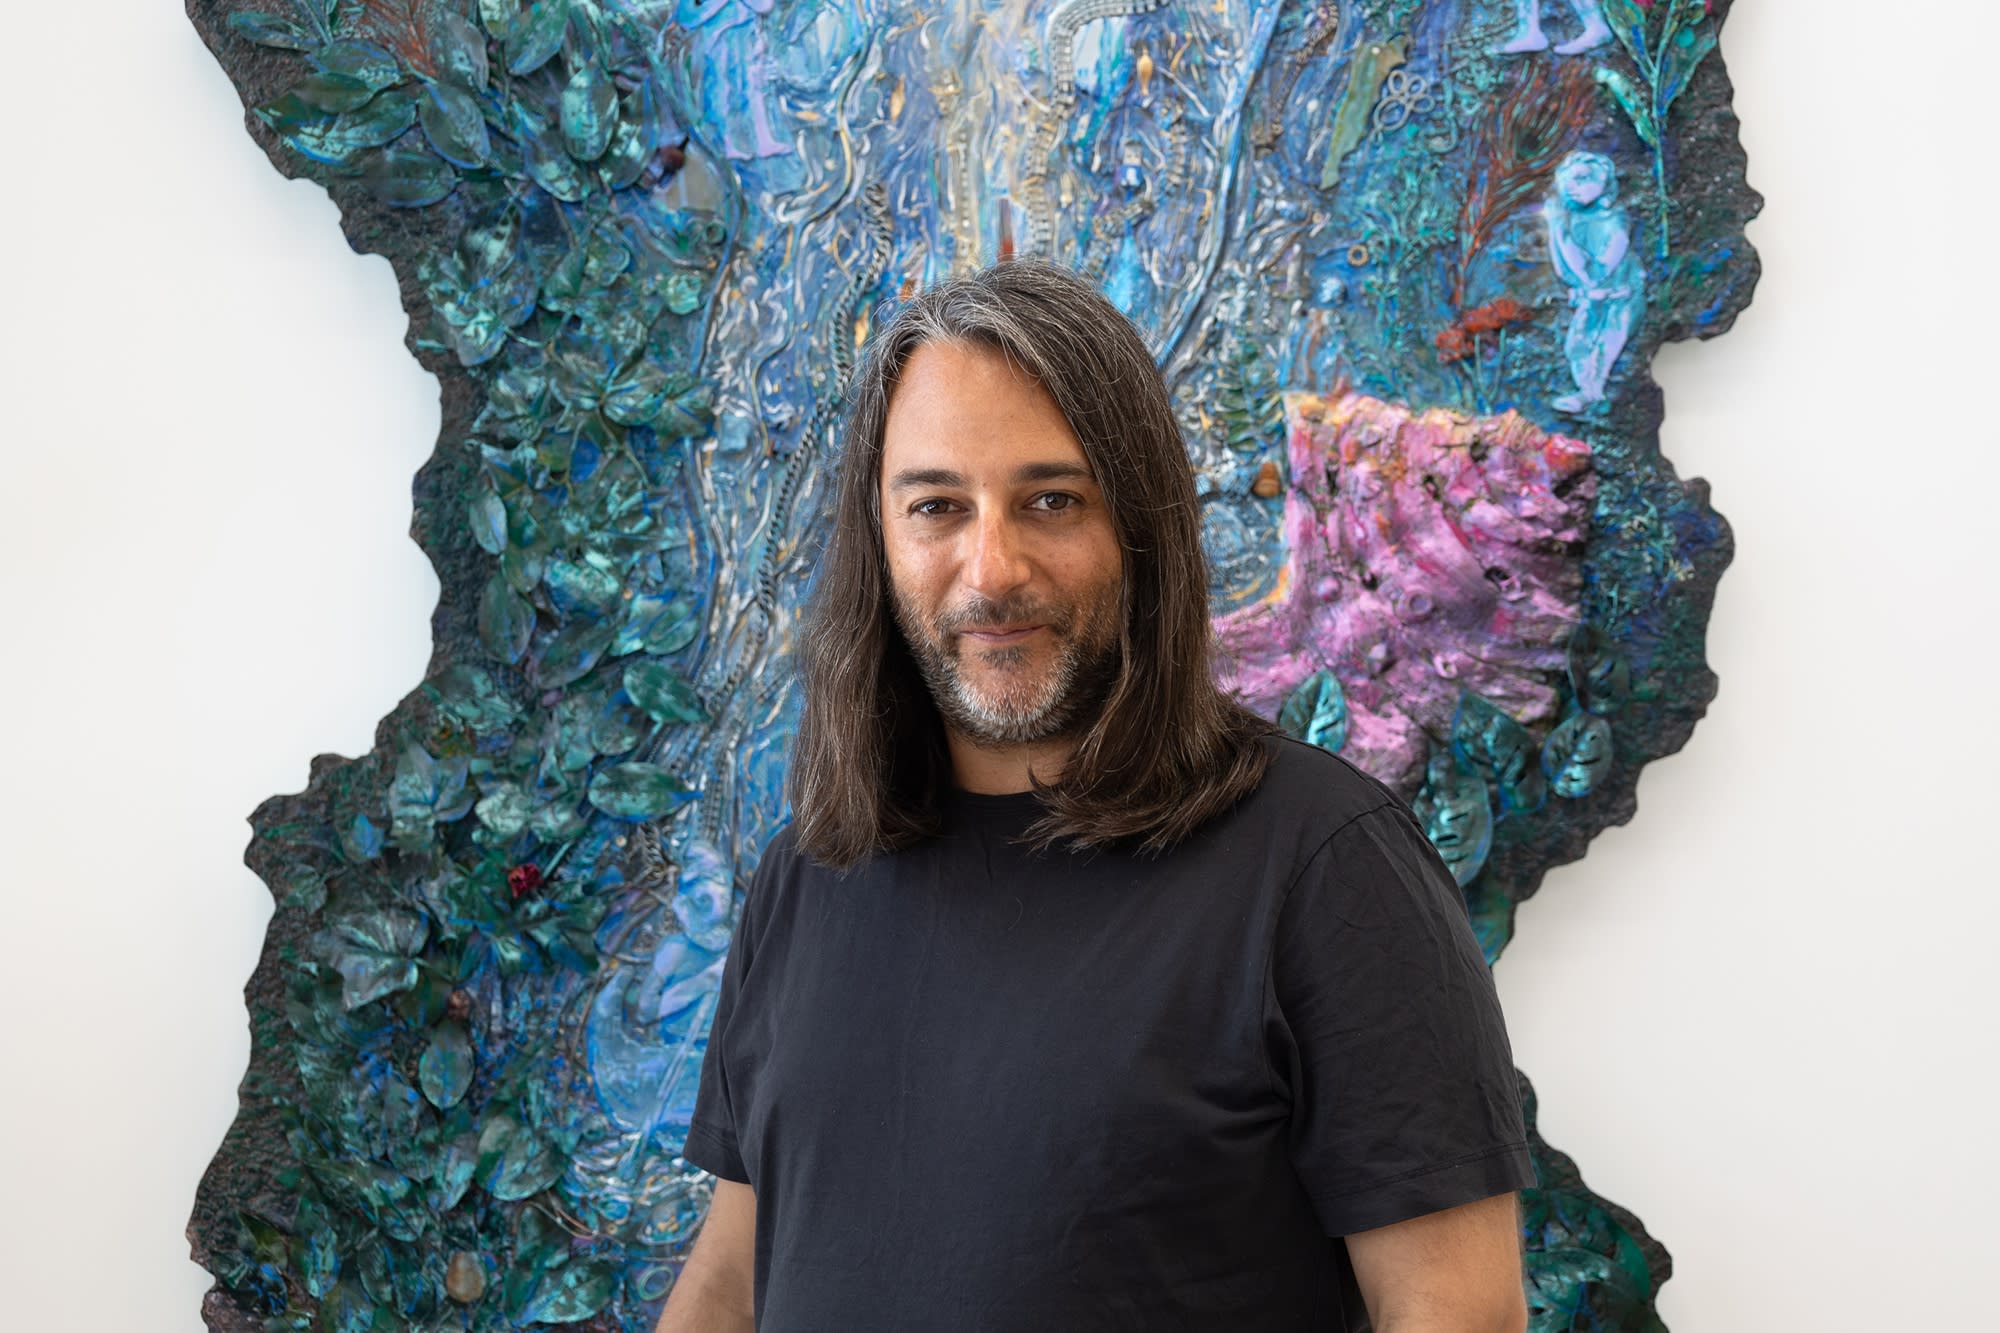 A man with olive skin and dark brown hair to his shoulders wears a silly smirk while standing in front of a blue sculptural artwork on a white wall.